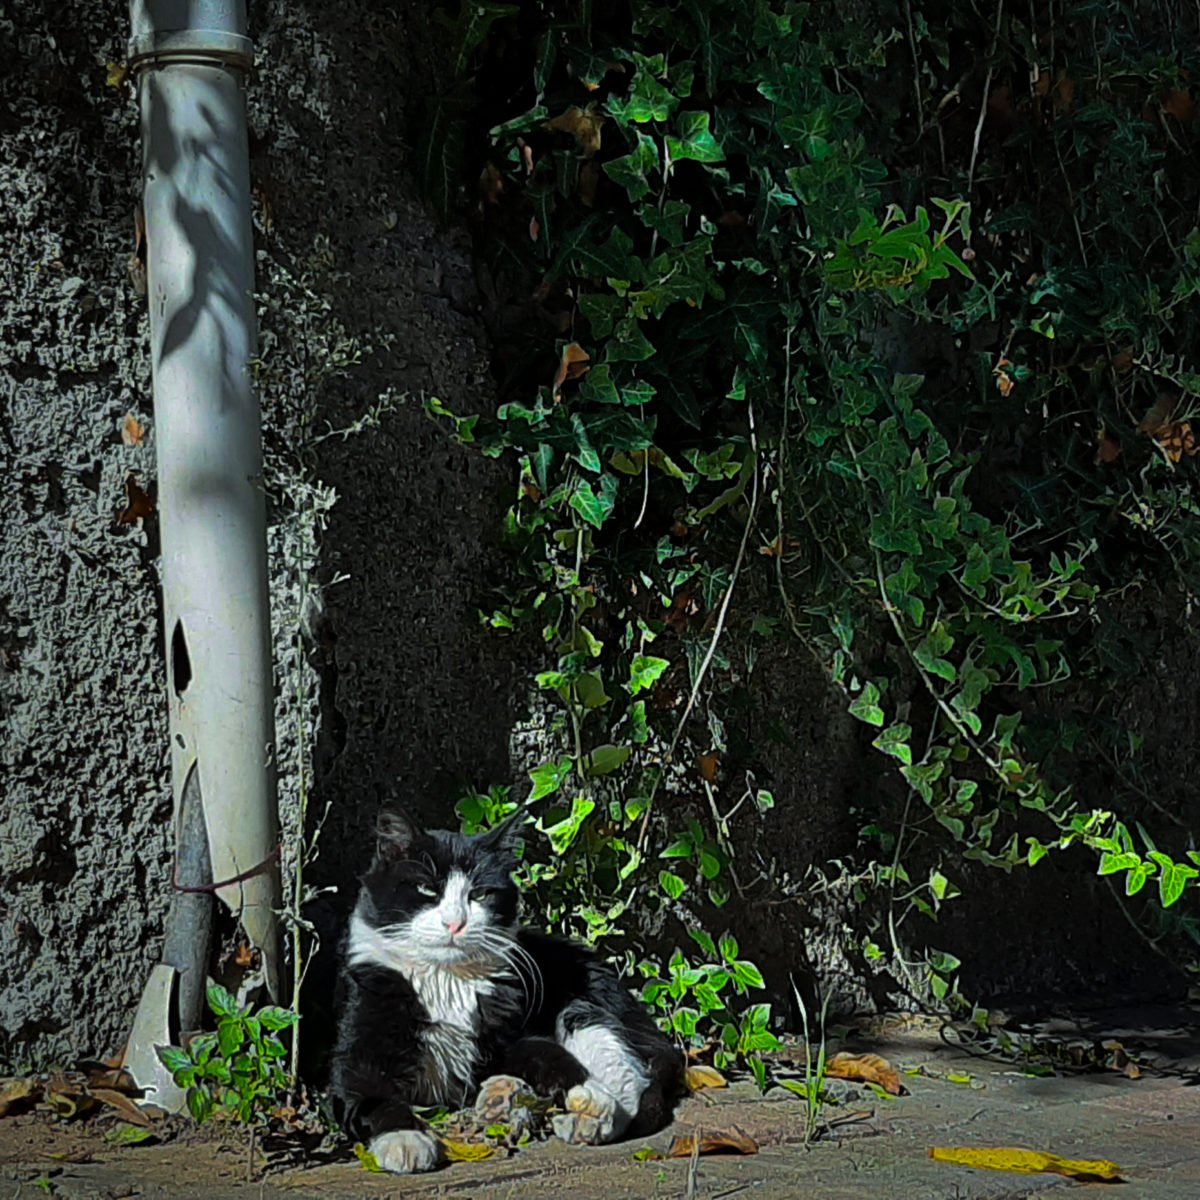 A black-white cat lays next to a pole by a stone wall overgrown with vines.